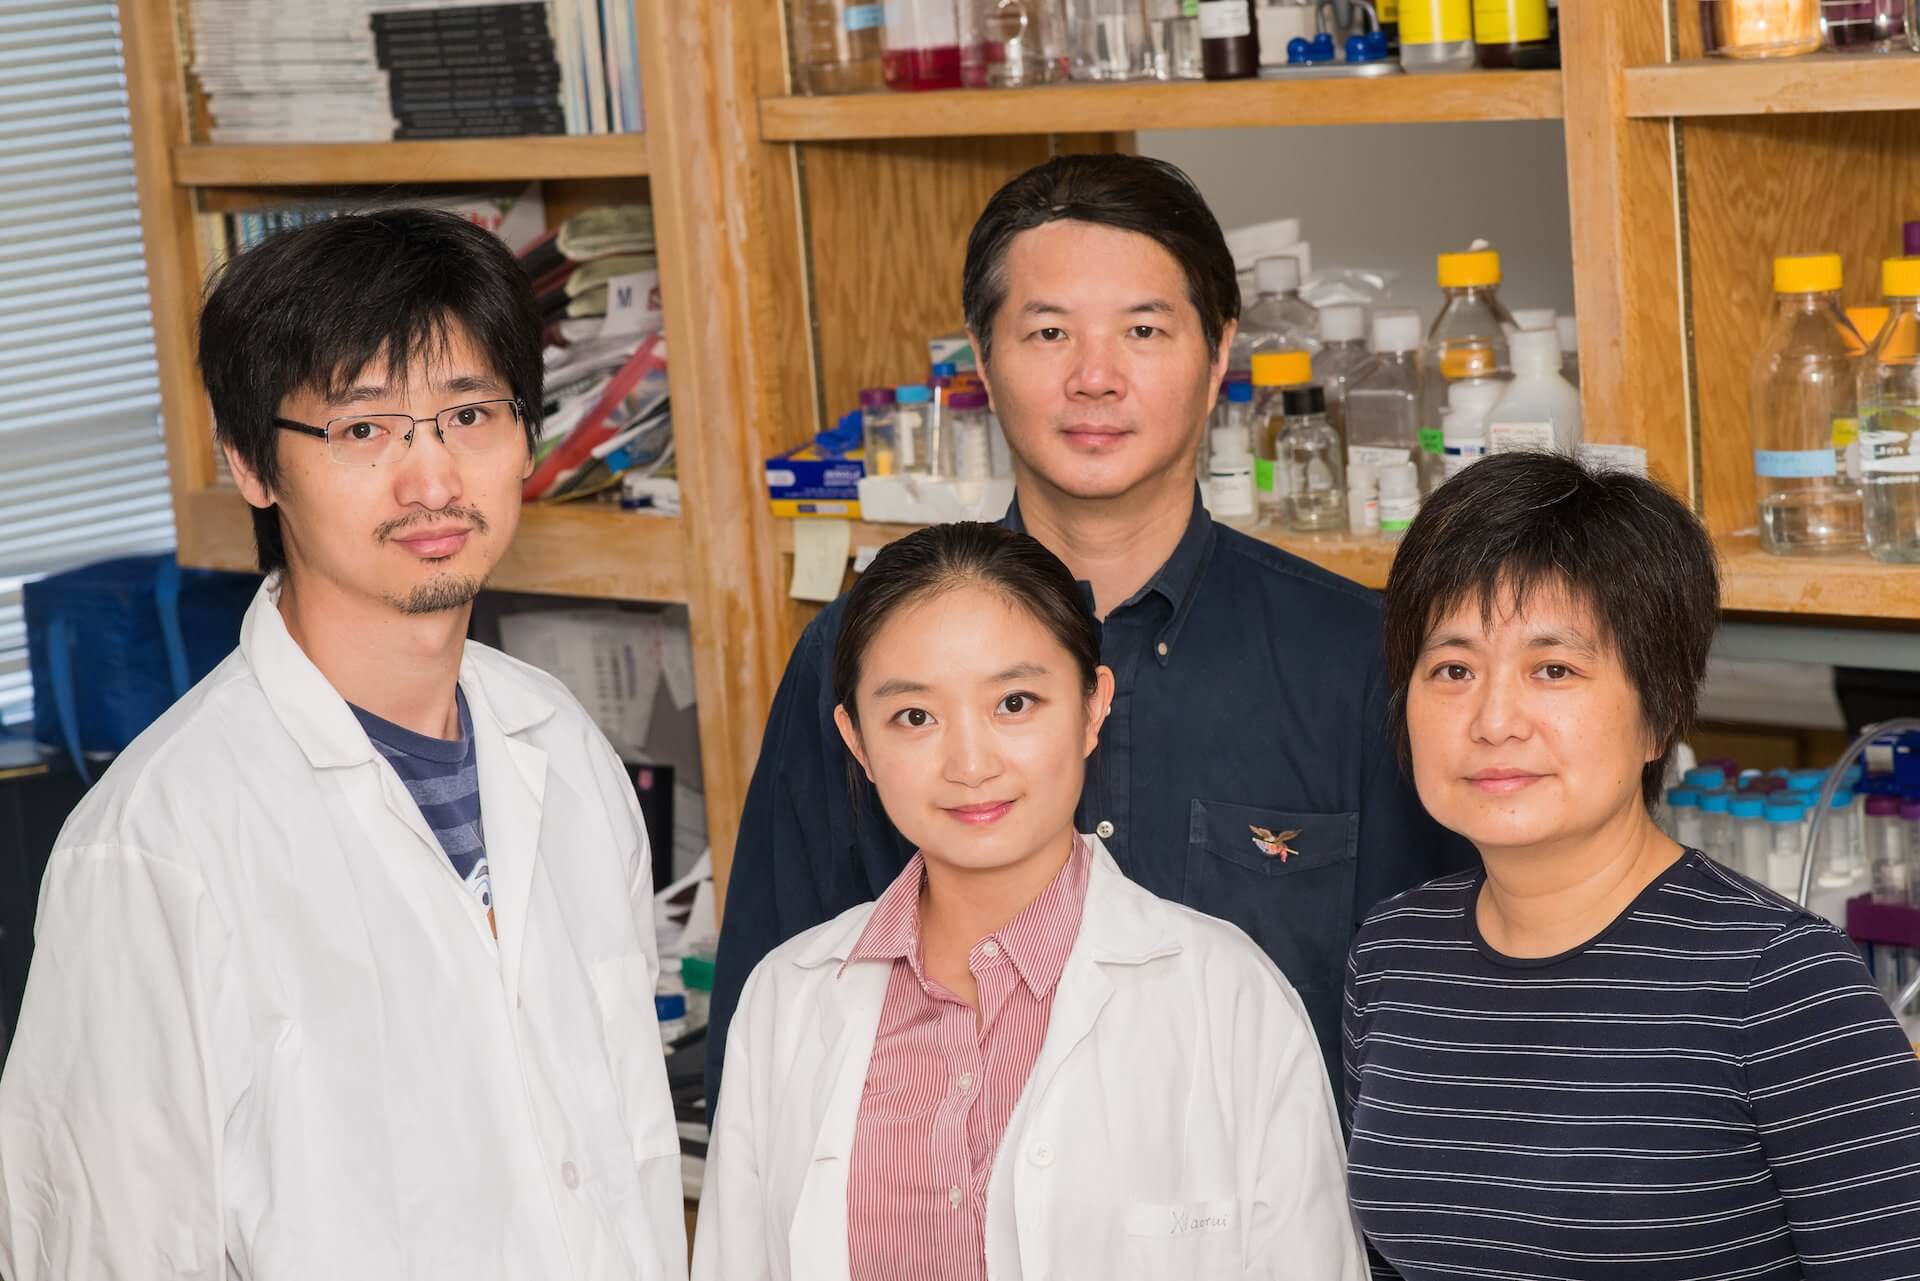 A team of researchers from Baylor College of Medicine and Rice University has captured the first structural map of leiomodin 2, a protein involved in the neuromuscular disease nemaline myopathy. From left: Fengyun Ni and Xiaorui Chen, postdoctoral researchers at Baylor; biochemist Jianpeng Ma, a professor at Rice and Baylor; and biochemist Qinghua Wang, an assistant professor at Baylor. (Credit: Jeff Fitlow/Rice University)